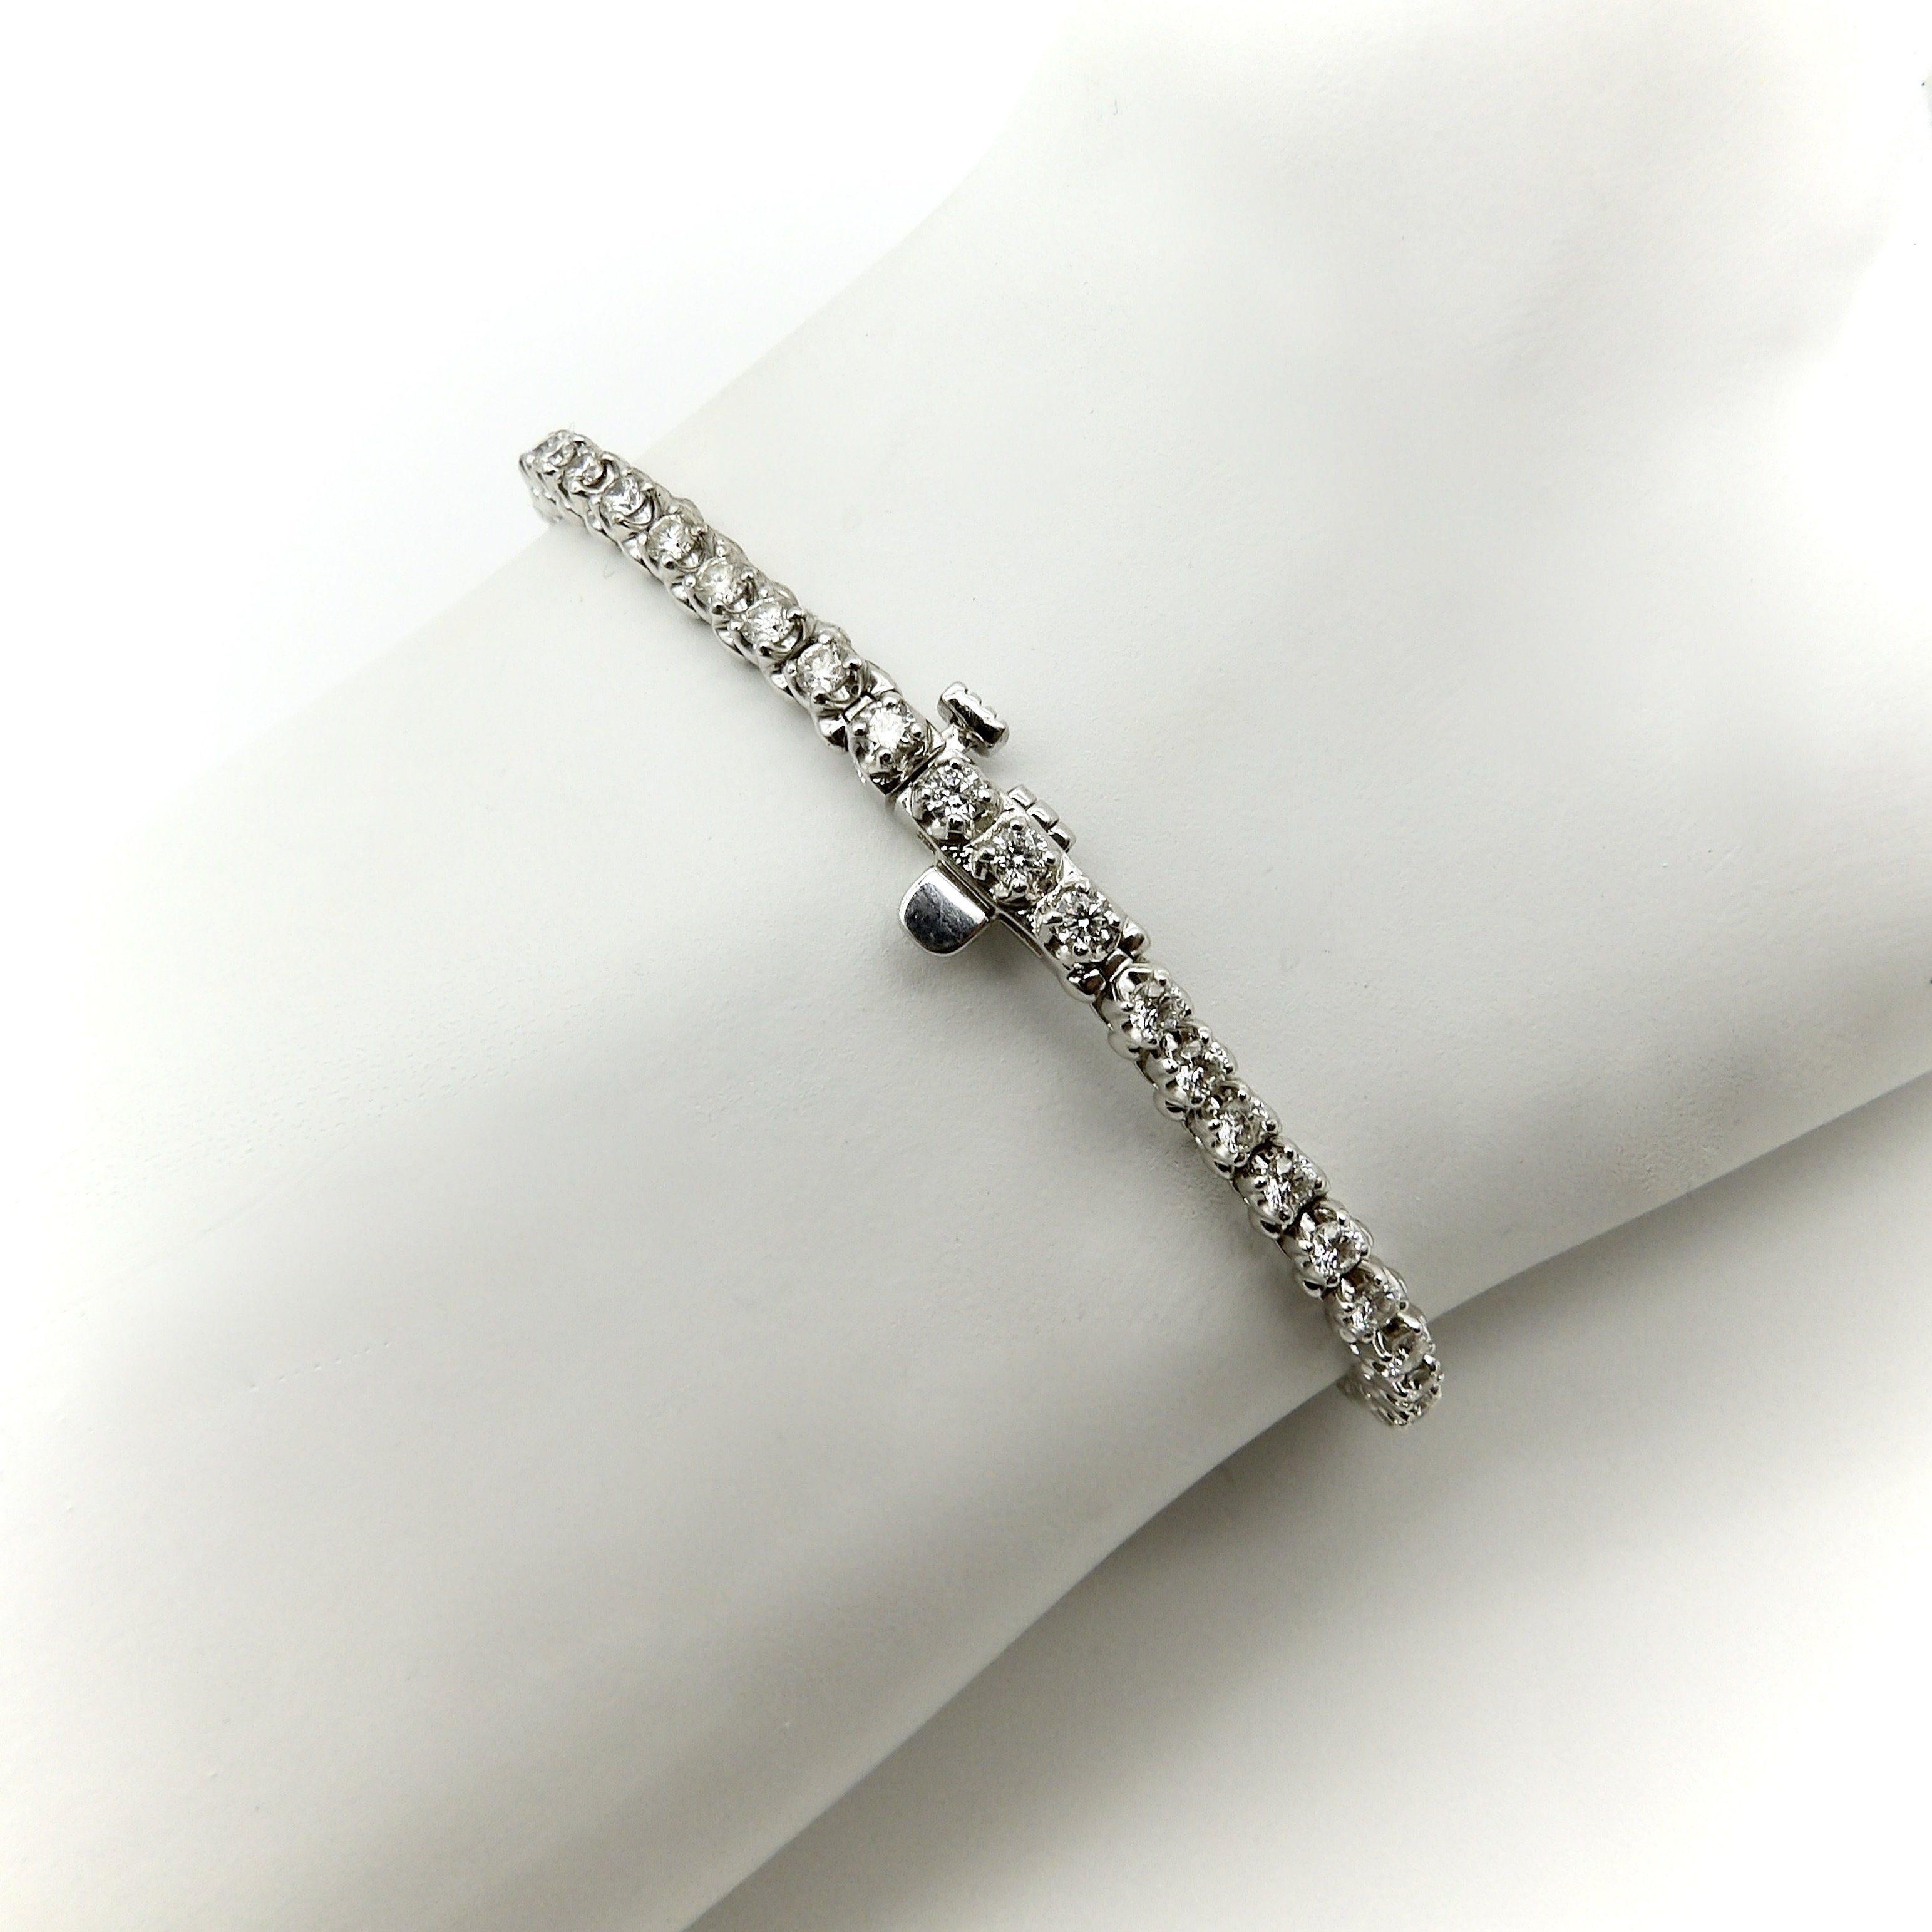 14K White Gold Diamond Tennis Bracelet 2.5 Carats In Excellent Condition For Sale In Venice, CA